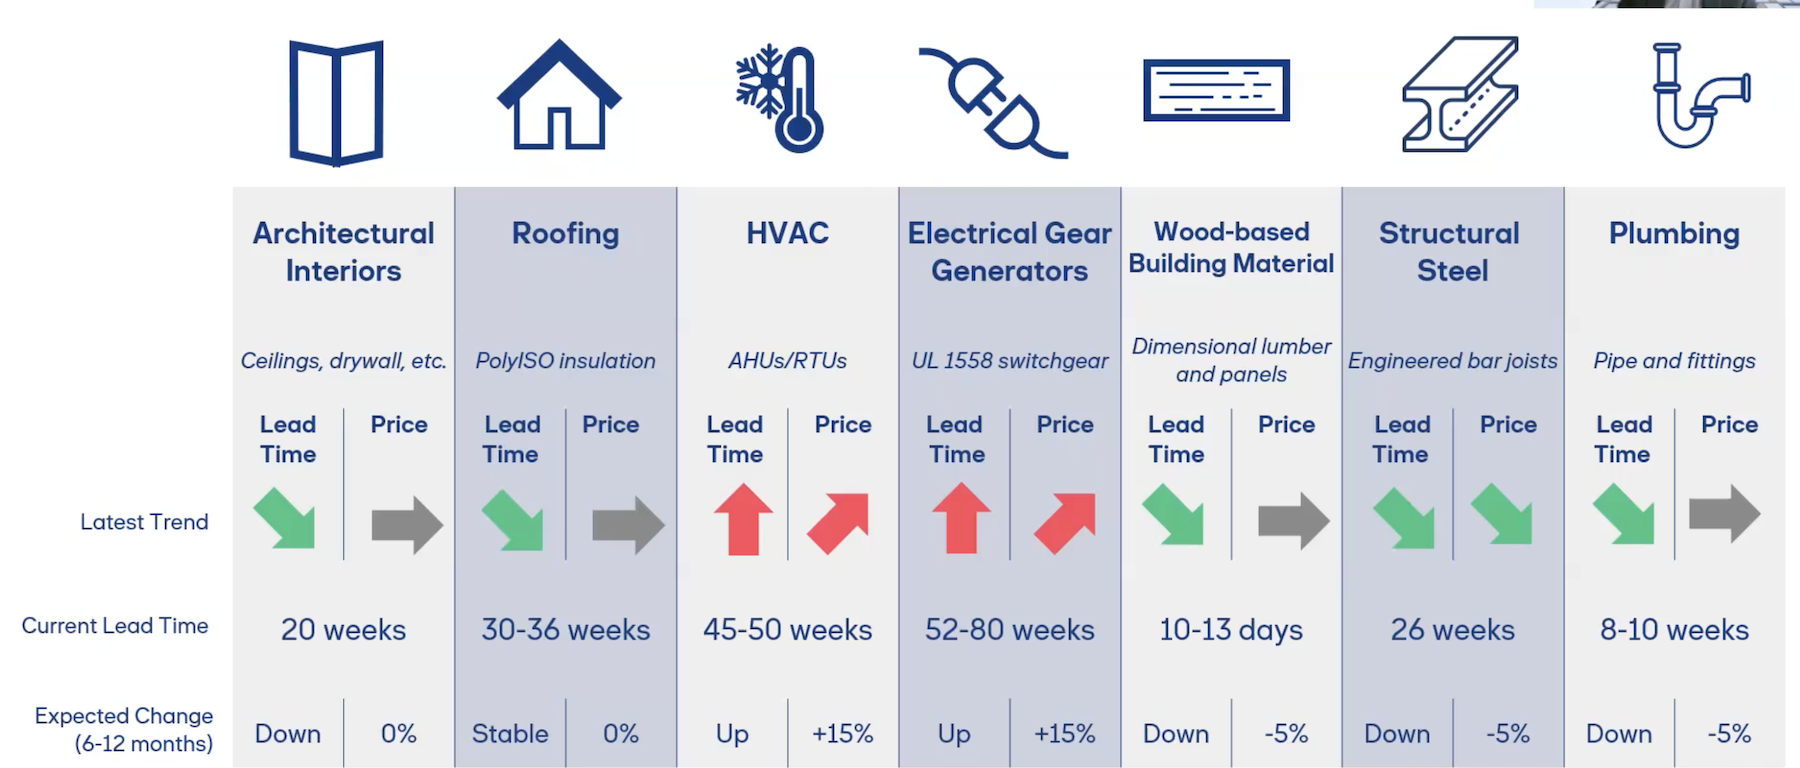 Lead times and inflation for key building materials